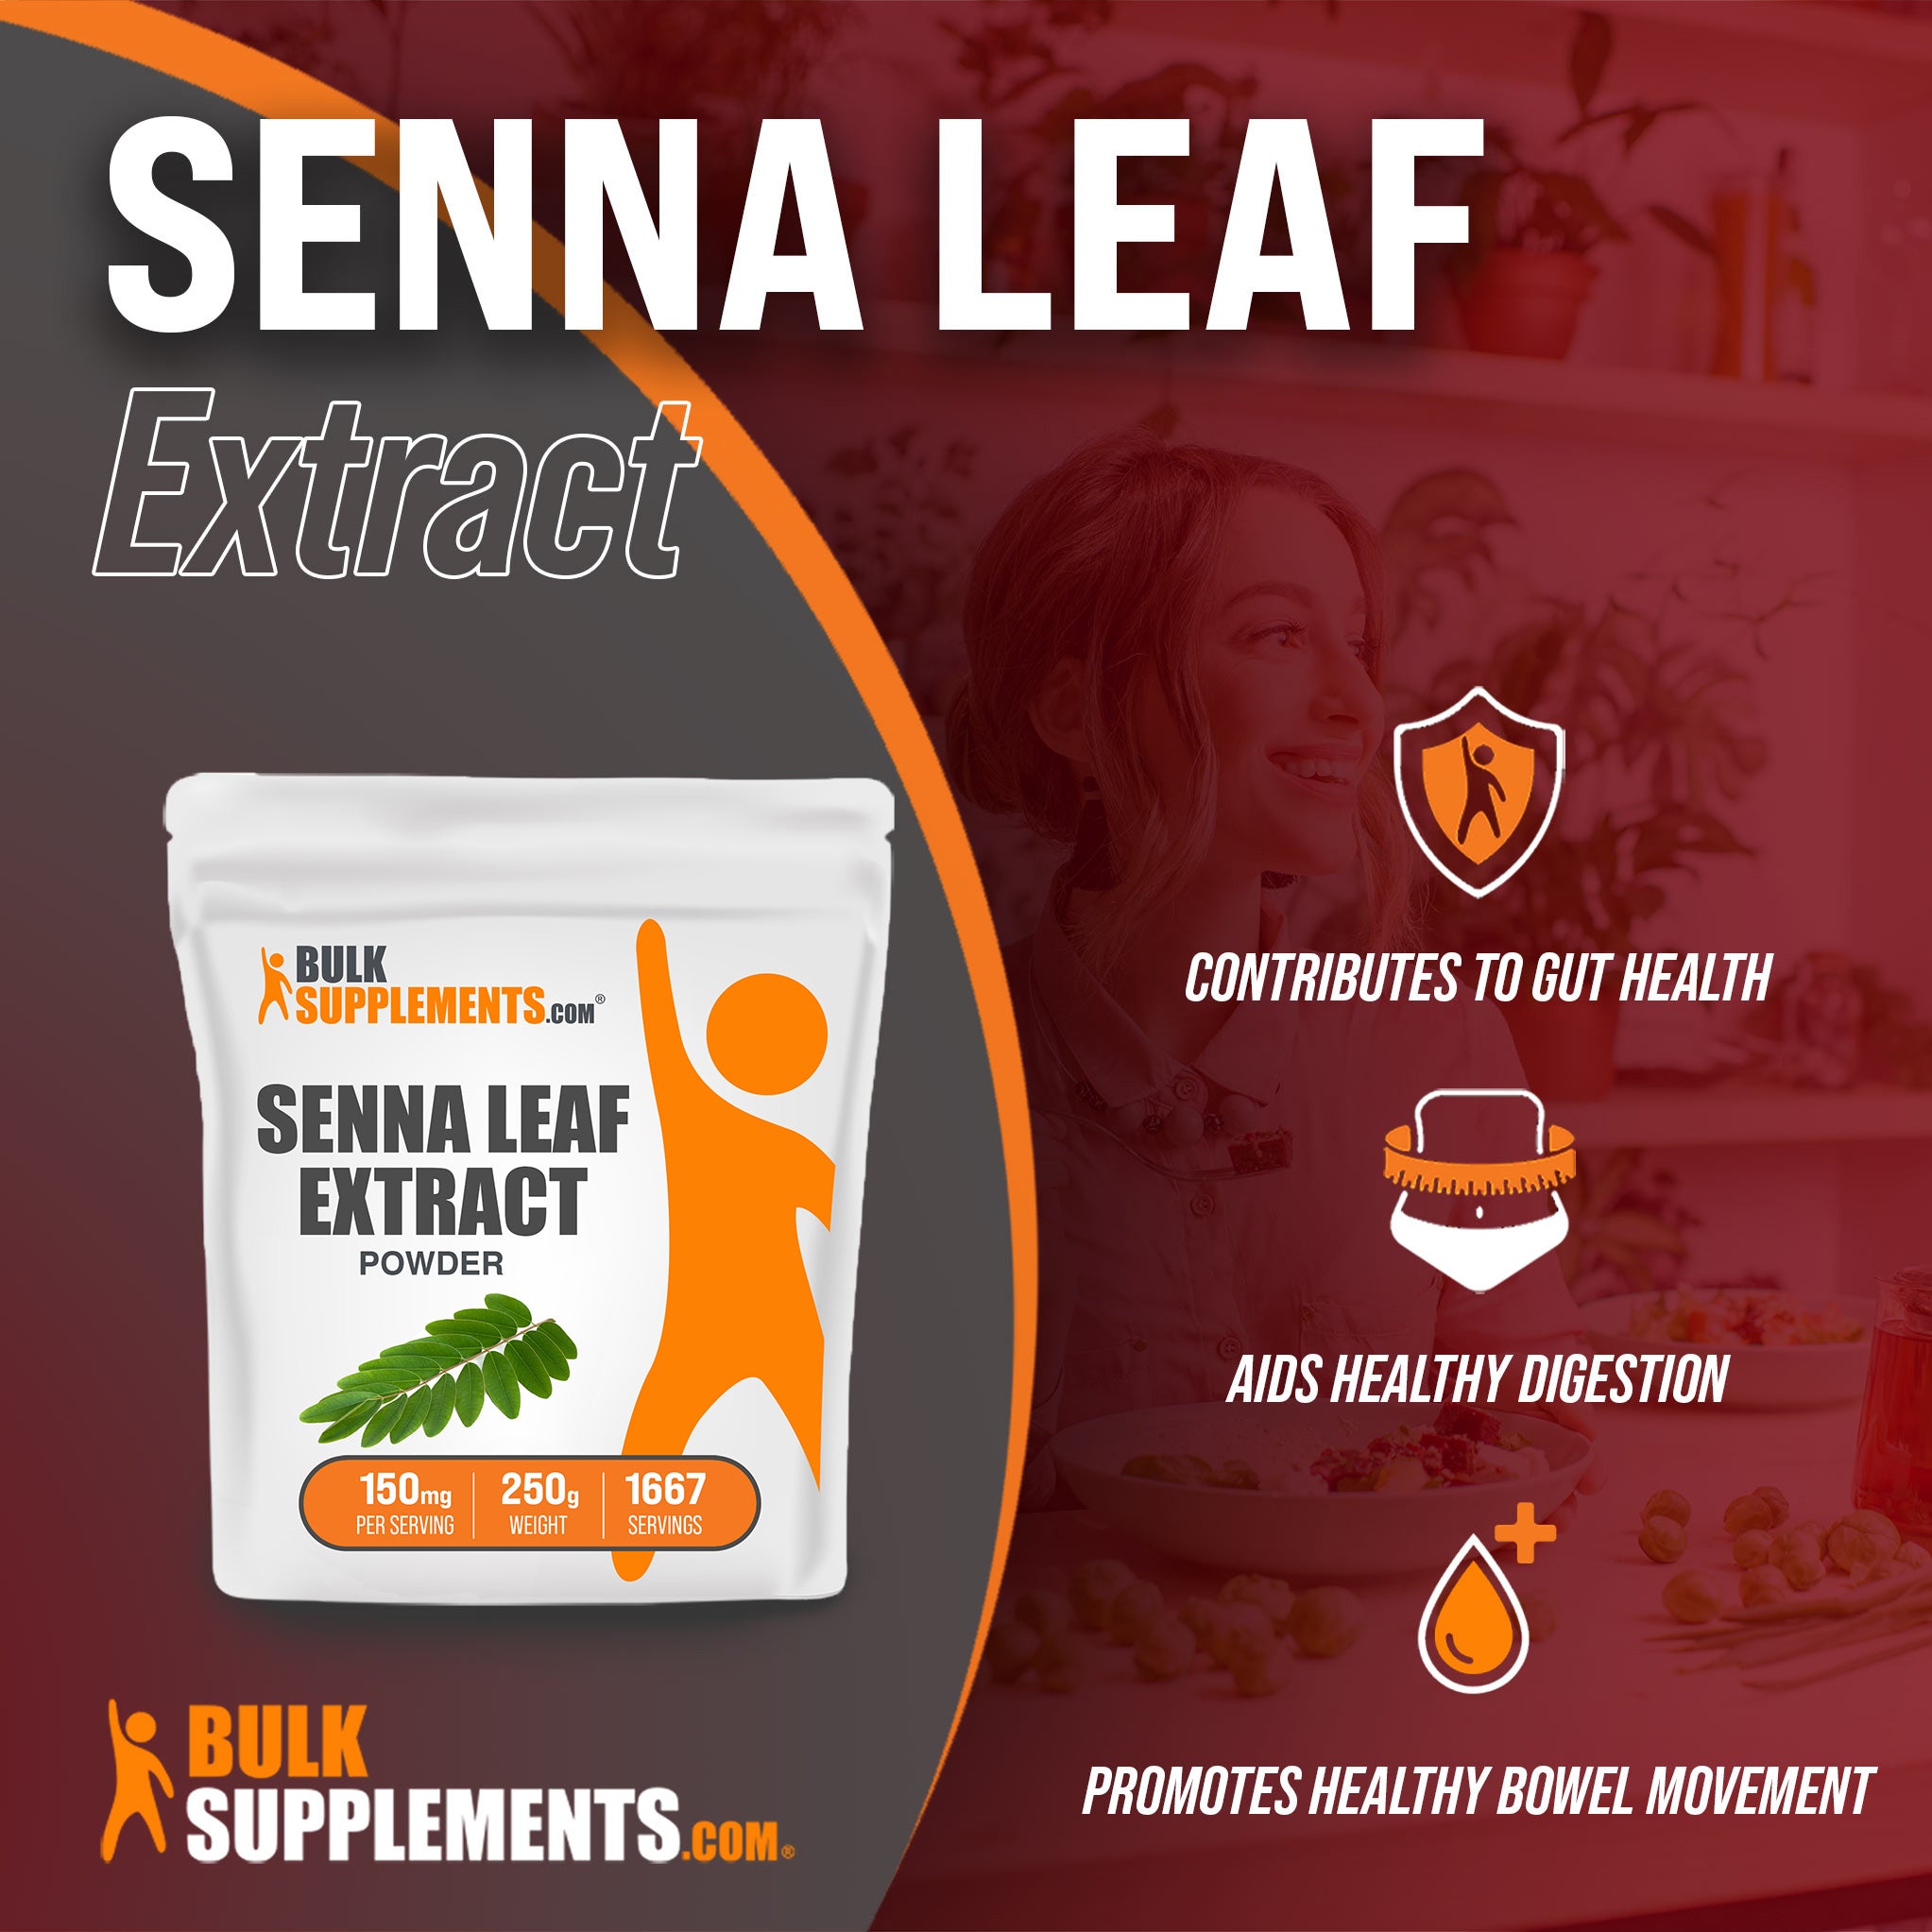 Benefits of Senna Leaf Extract: contributes to gut health, aids healthy digestion, promotes healthy bowel movement